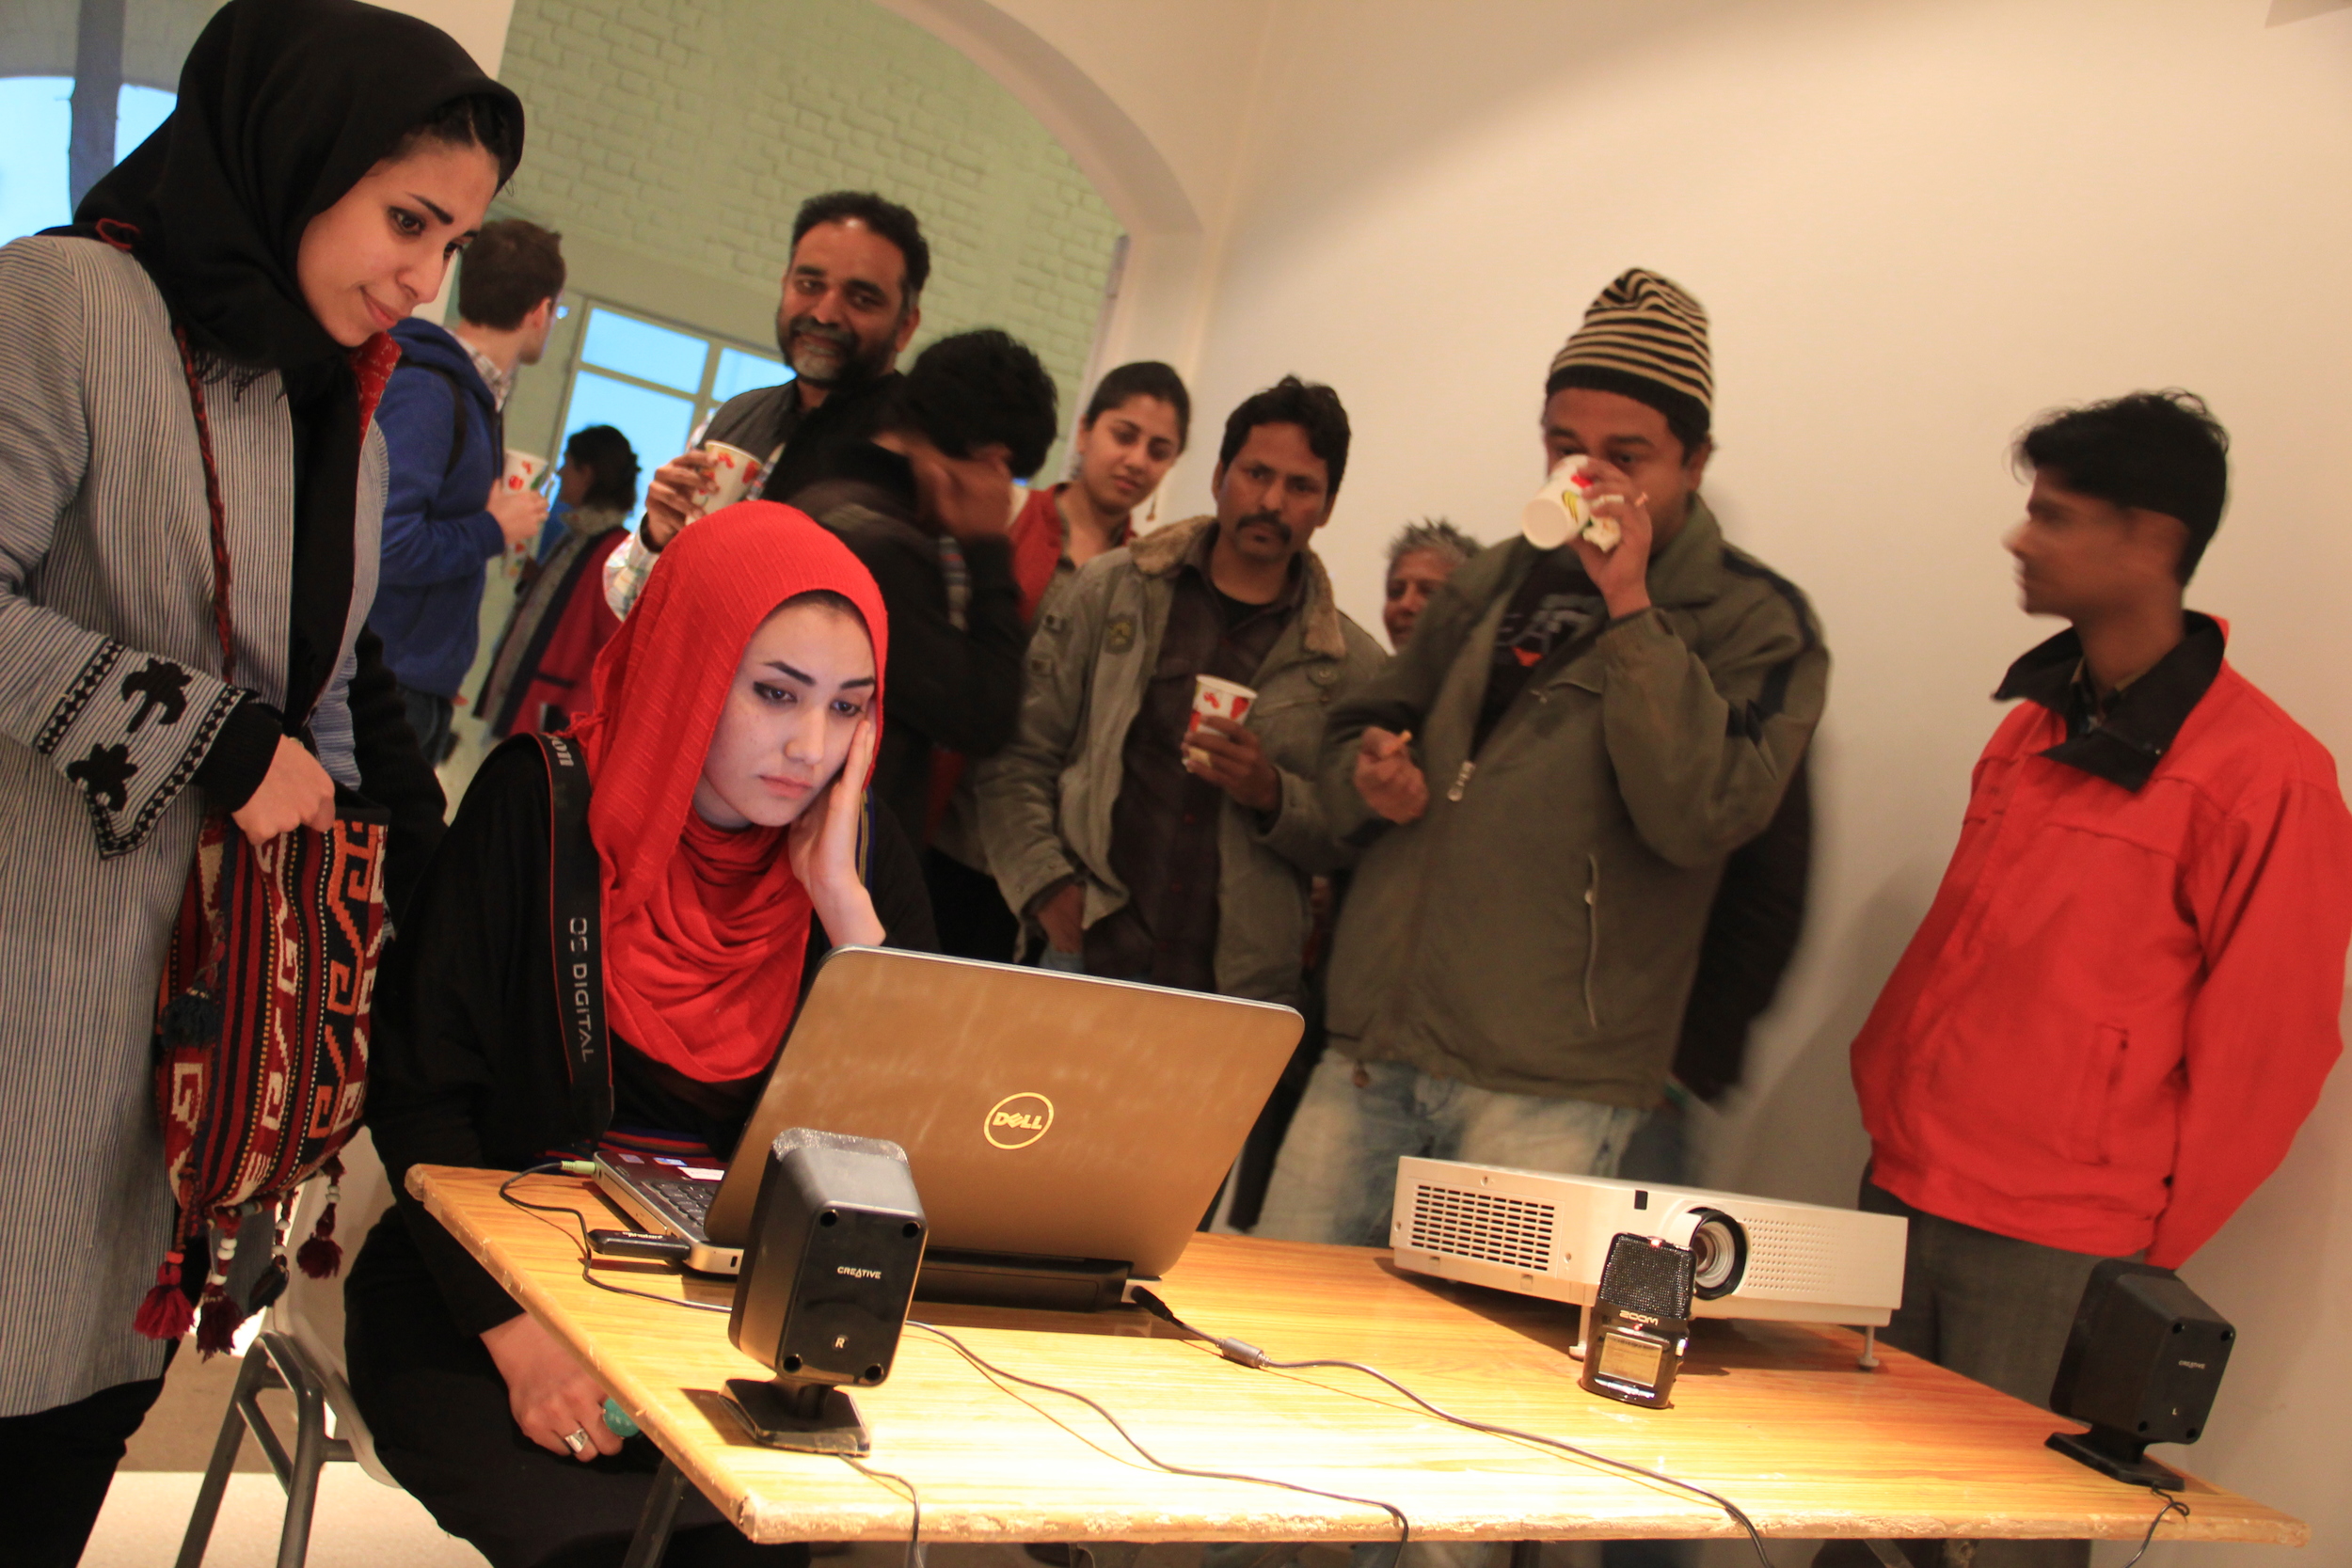  Exhibition view of visitors participating in Rabbya Naseer and Hurmat Ul Ain's event,&nbsp; Cross Connection  (2013). Photograph by Tenzing Sonam.&nbsp; 